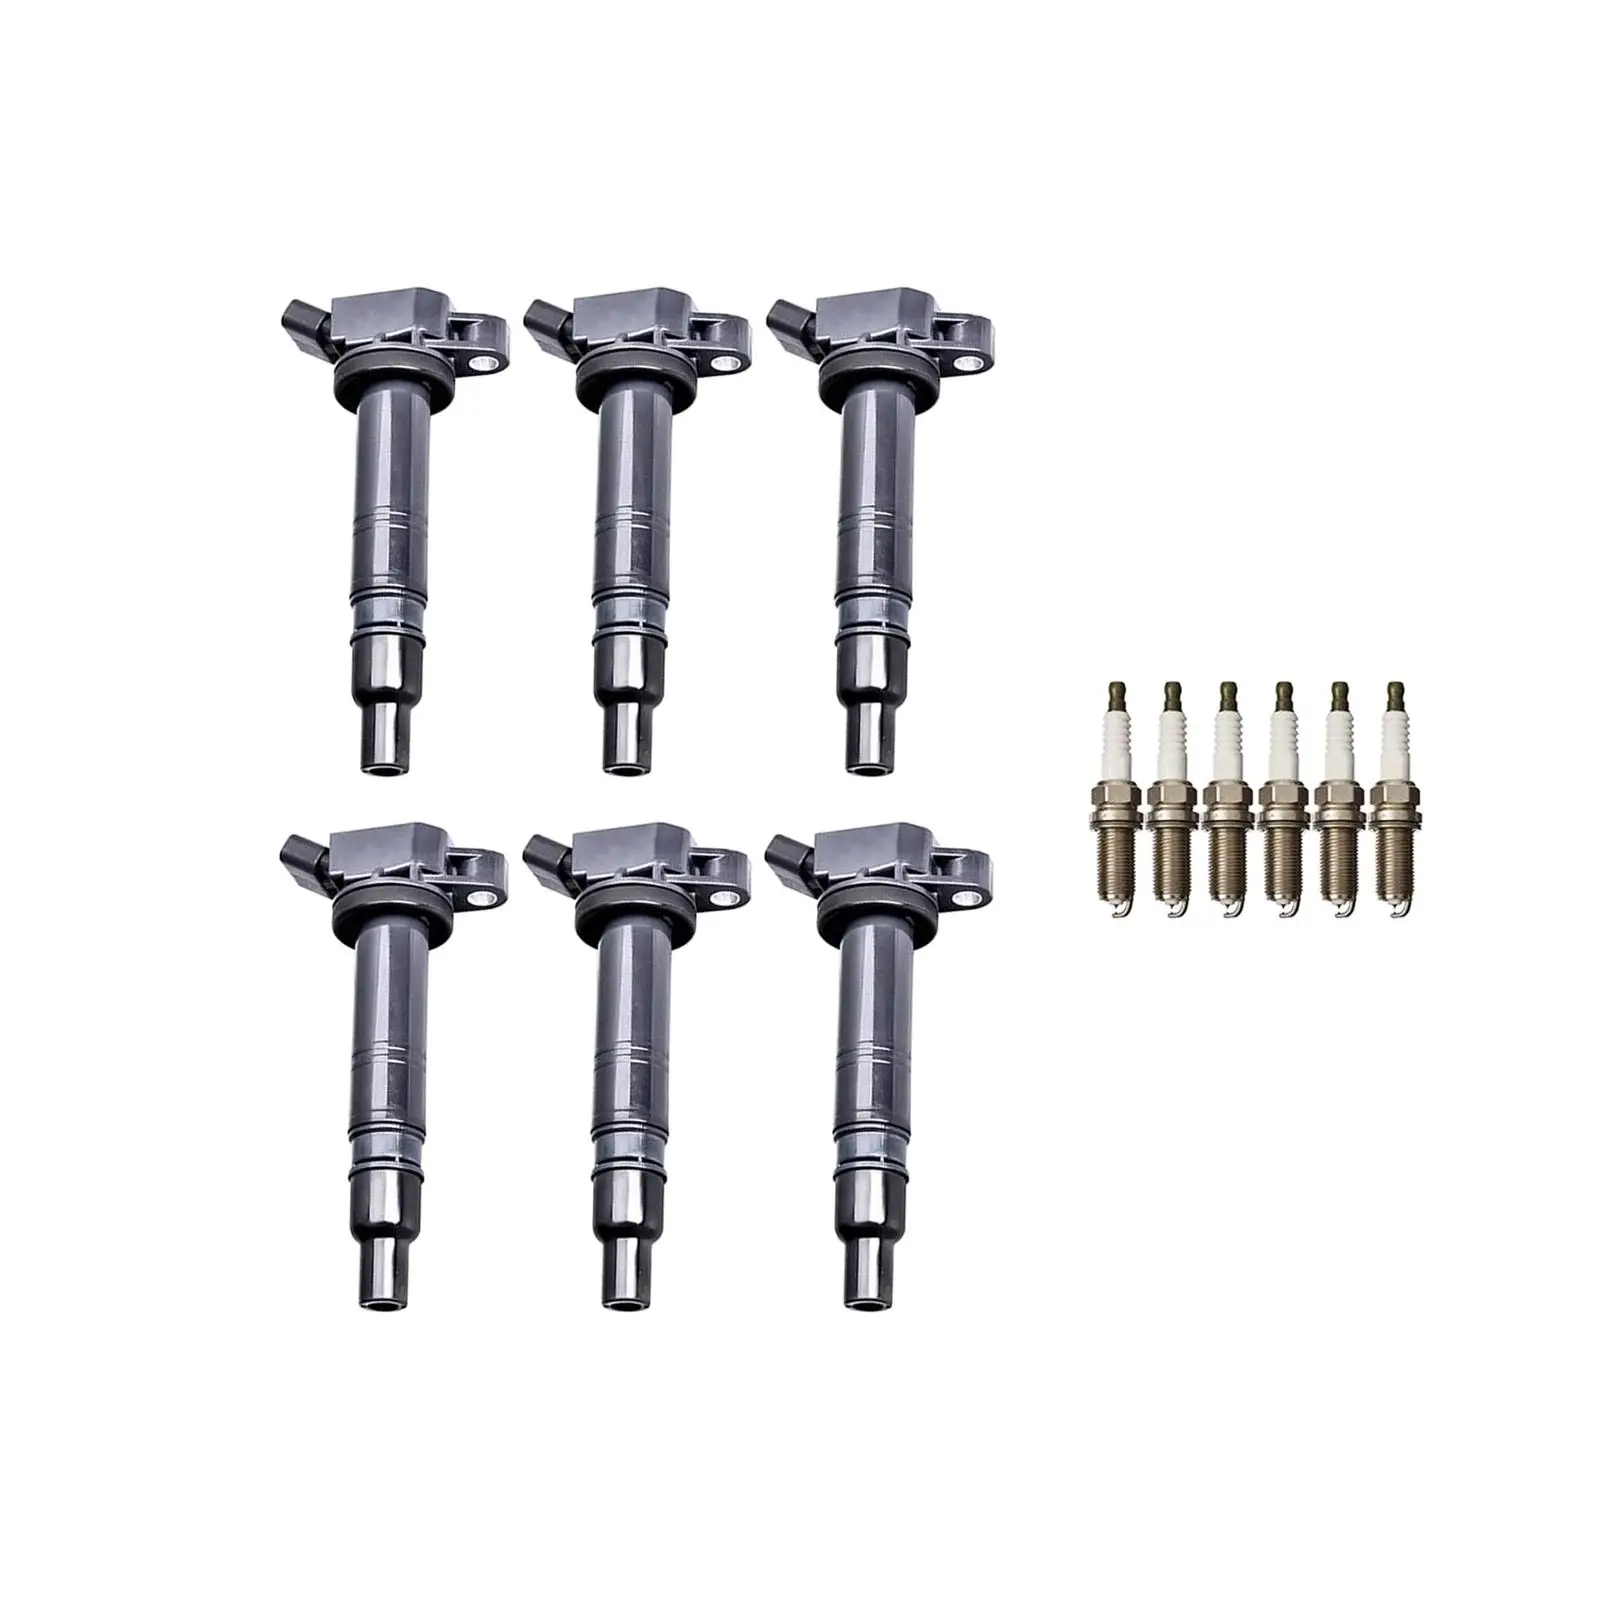 6 Ignition Coils 6 Iridium Spark Plugs for Toyota for tacoma 4 Runner